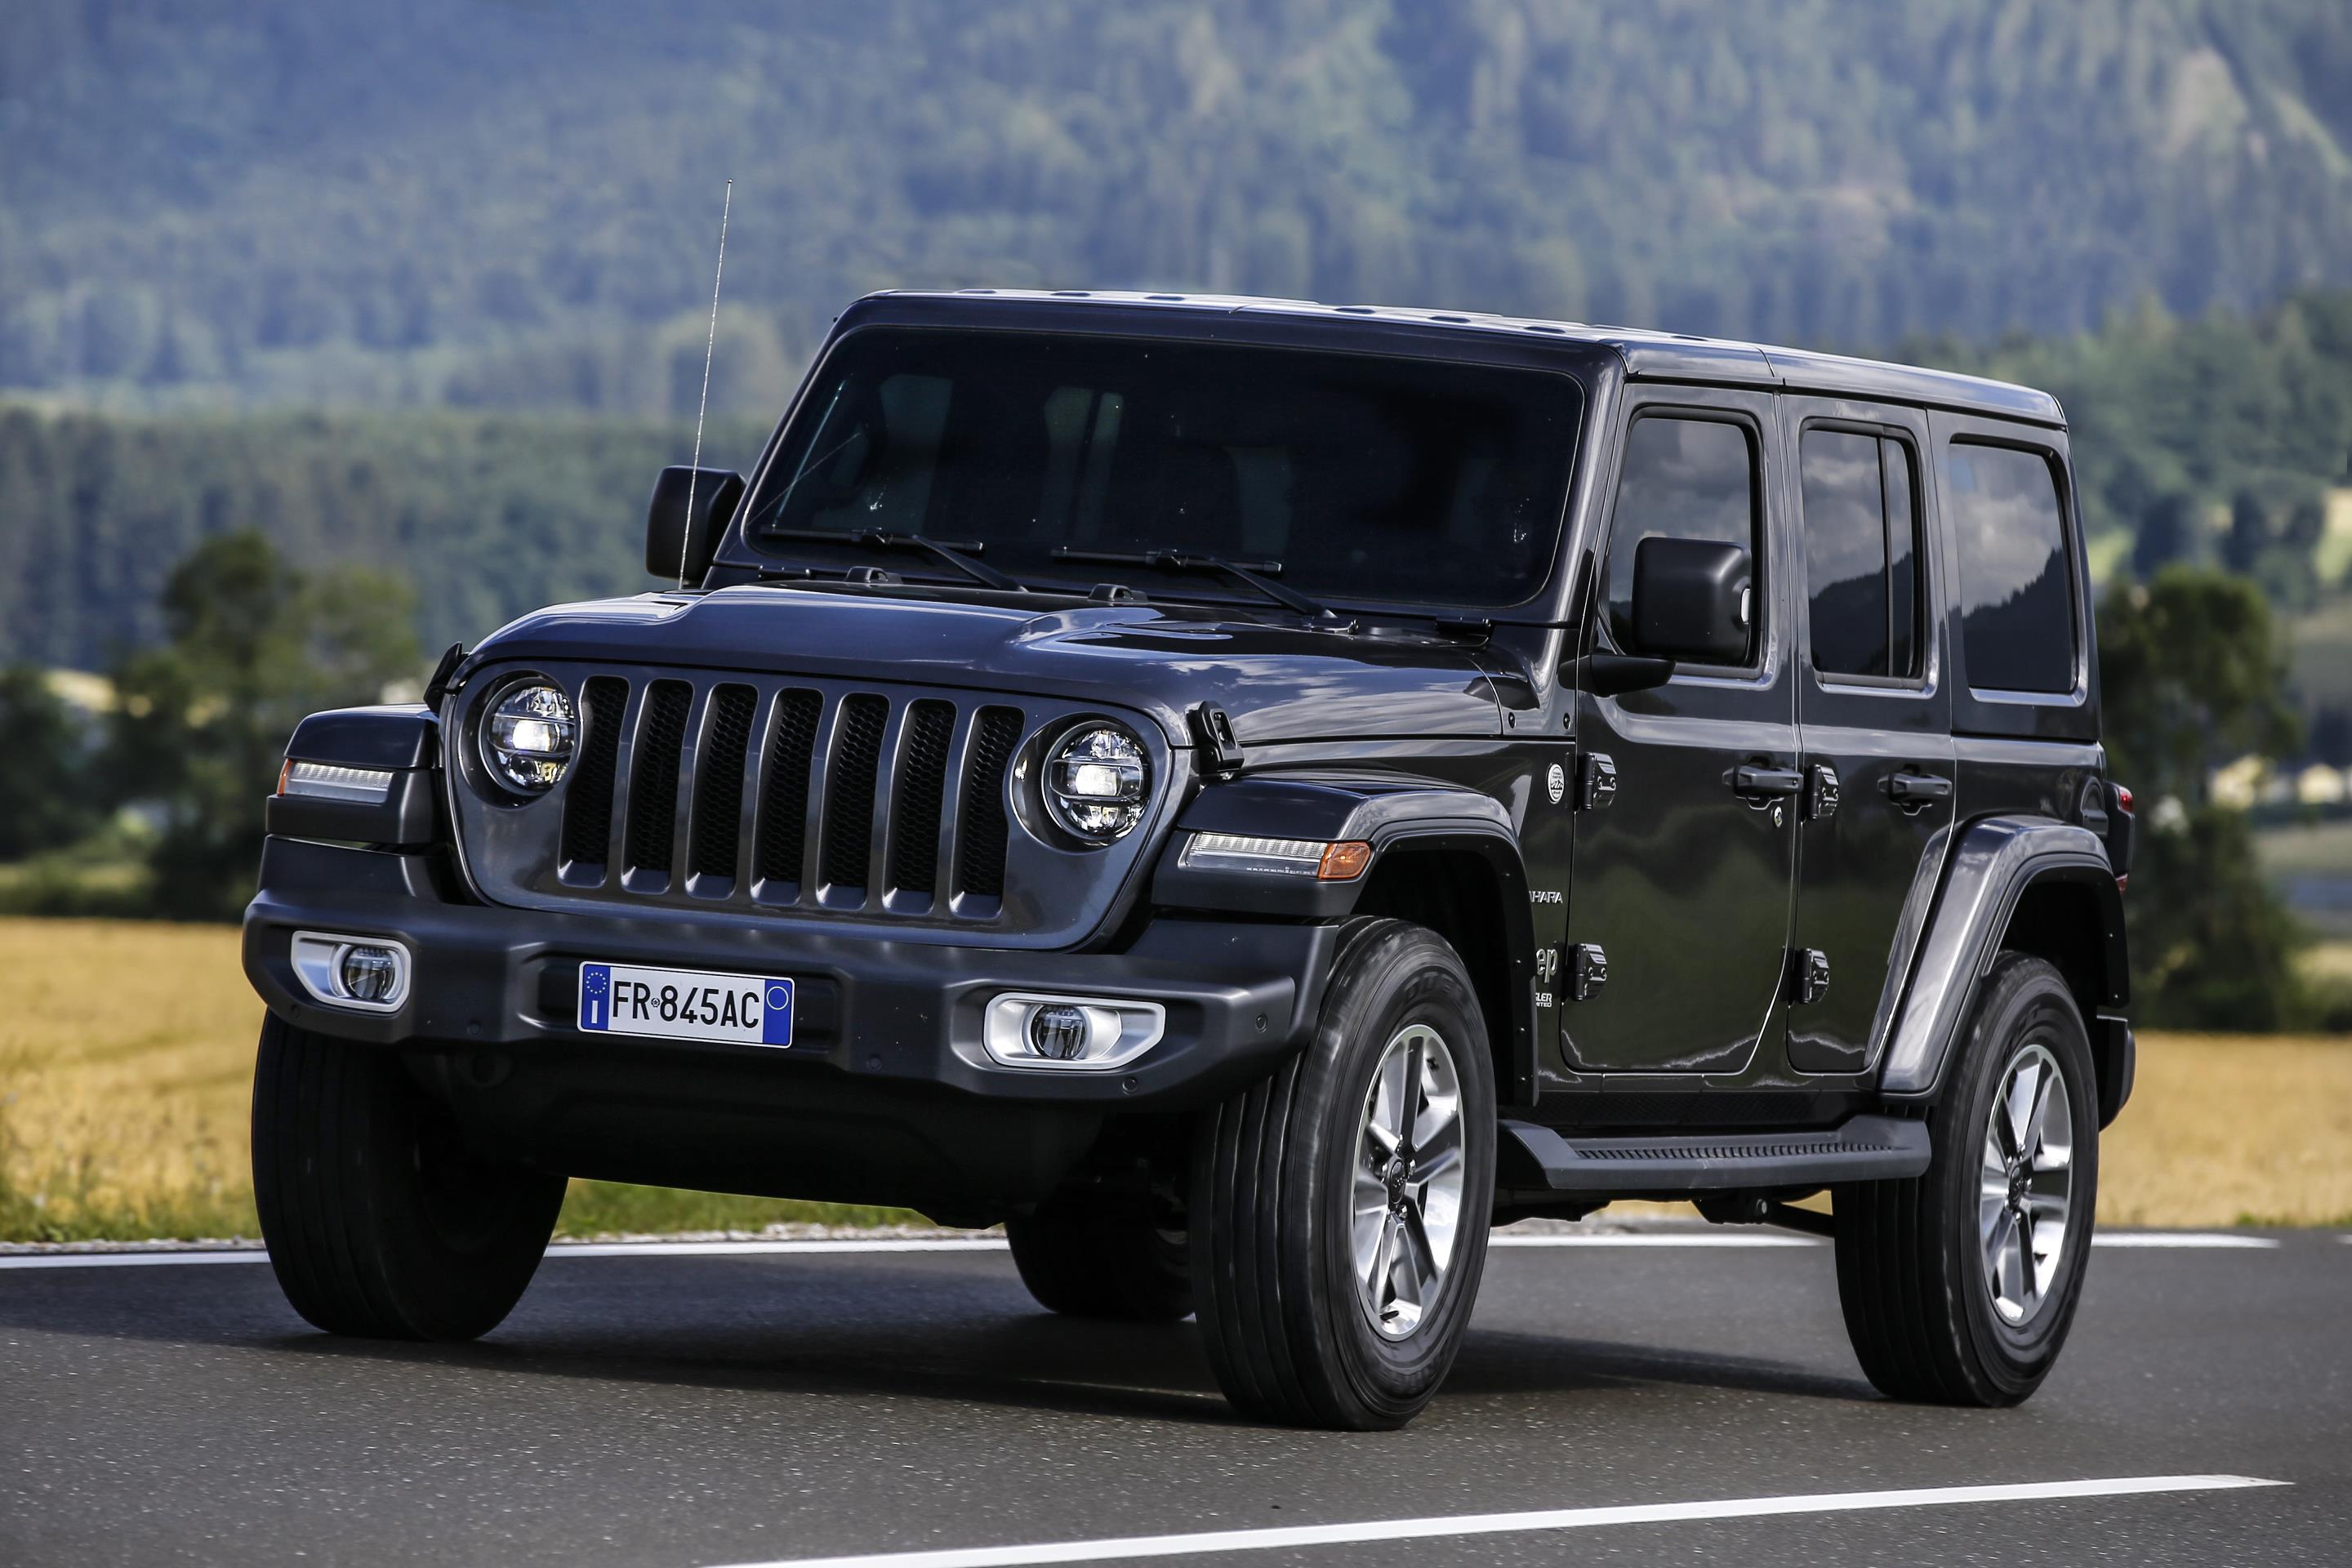 Black Jeep Wrangler driving on a road